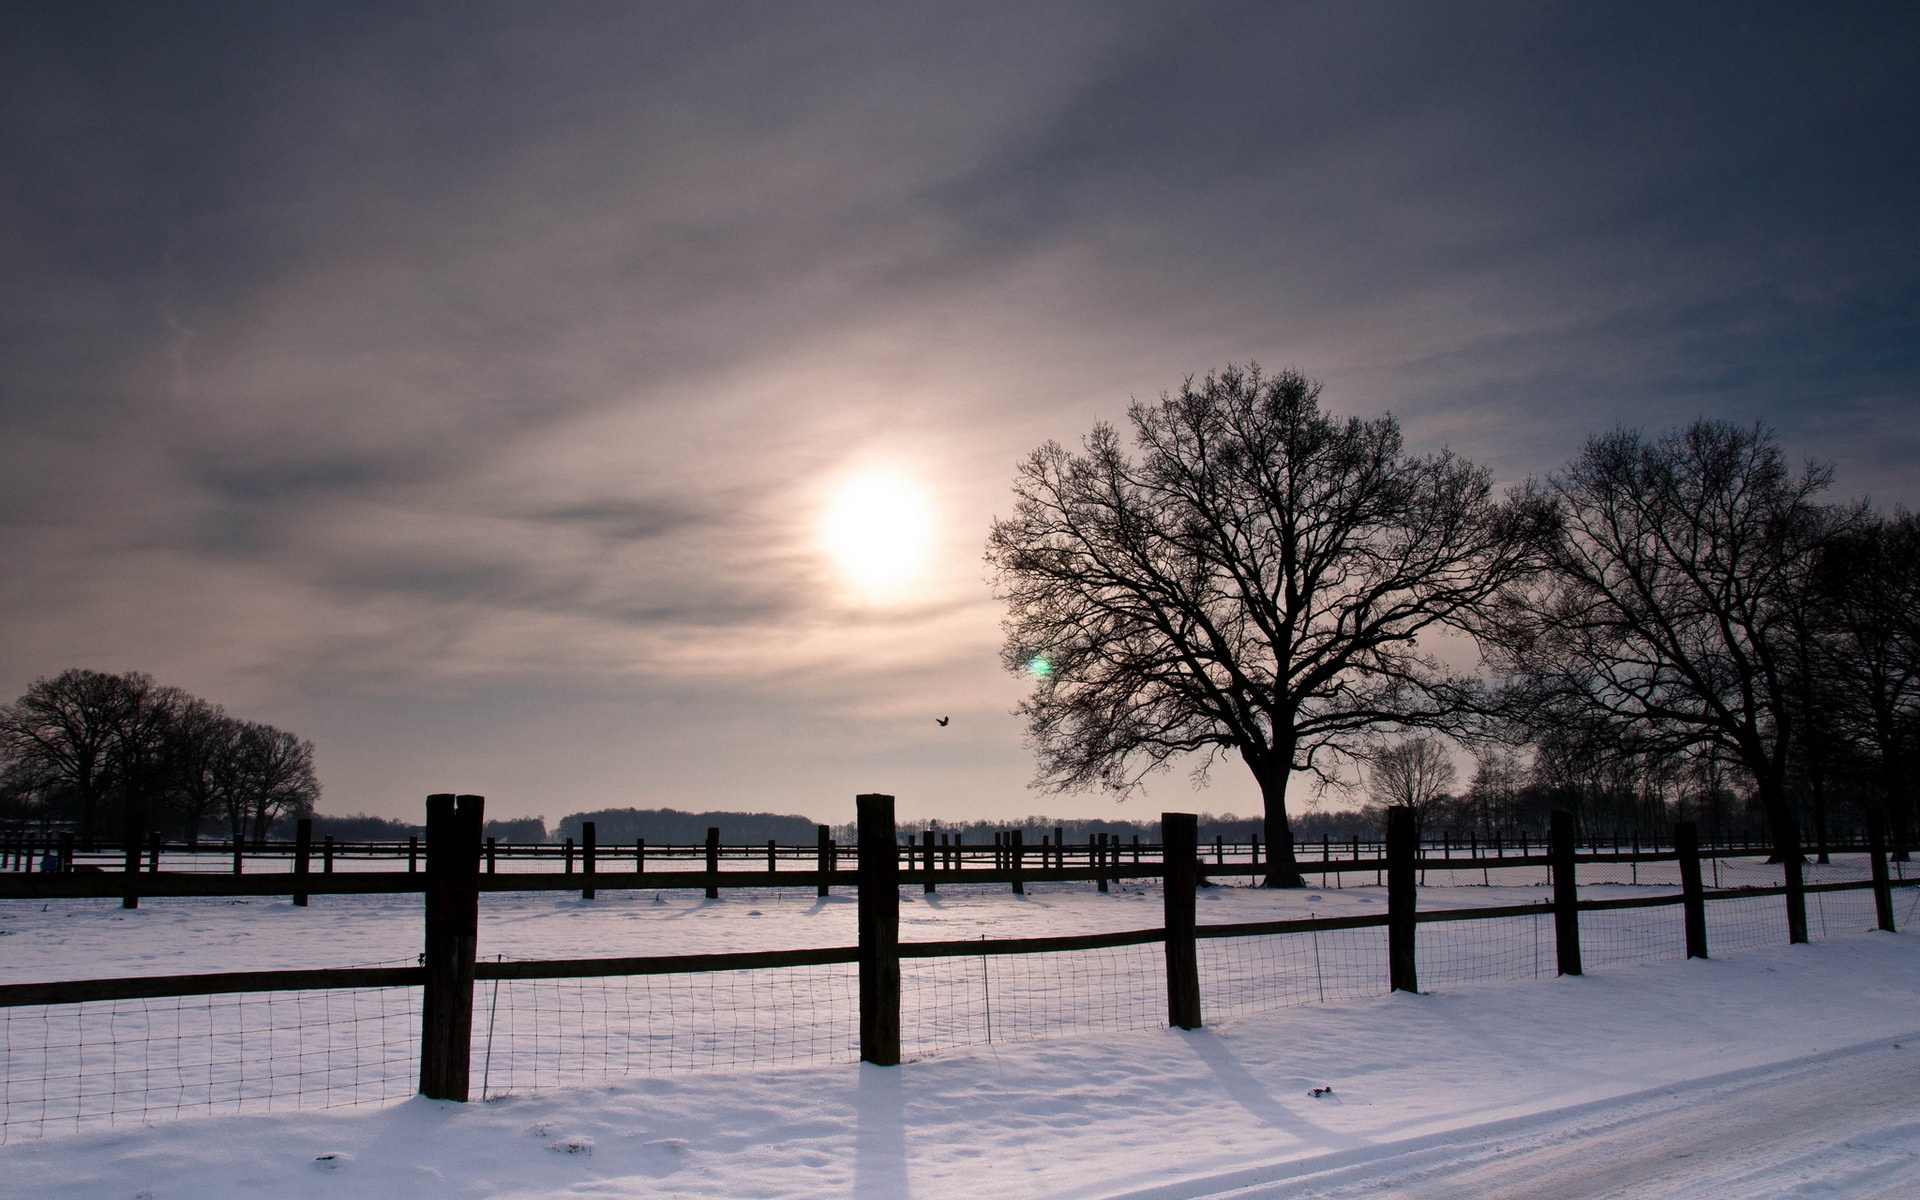 roads nature landscapes winter snow fence fields trees sunset sunrise sky clouds wallpaper background